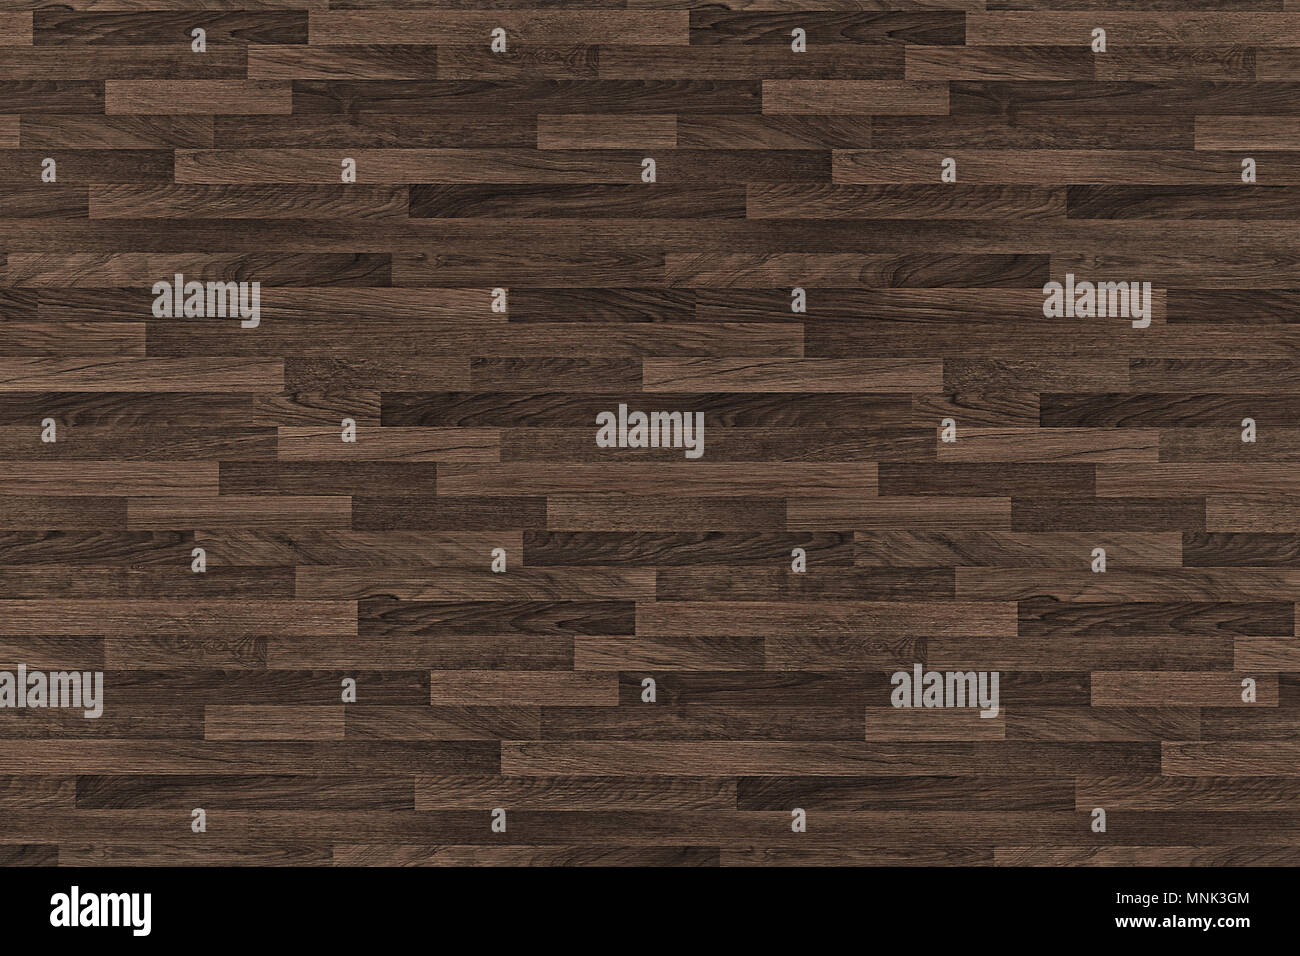 Hi quality wooden texture used as background - horizontal lines Stock Photo